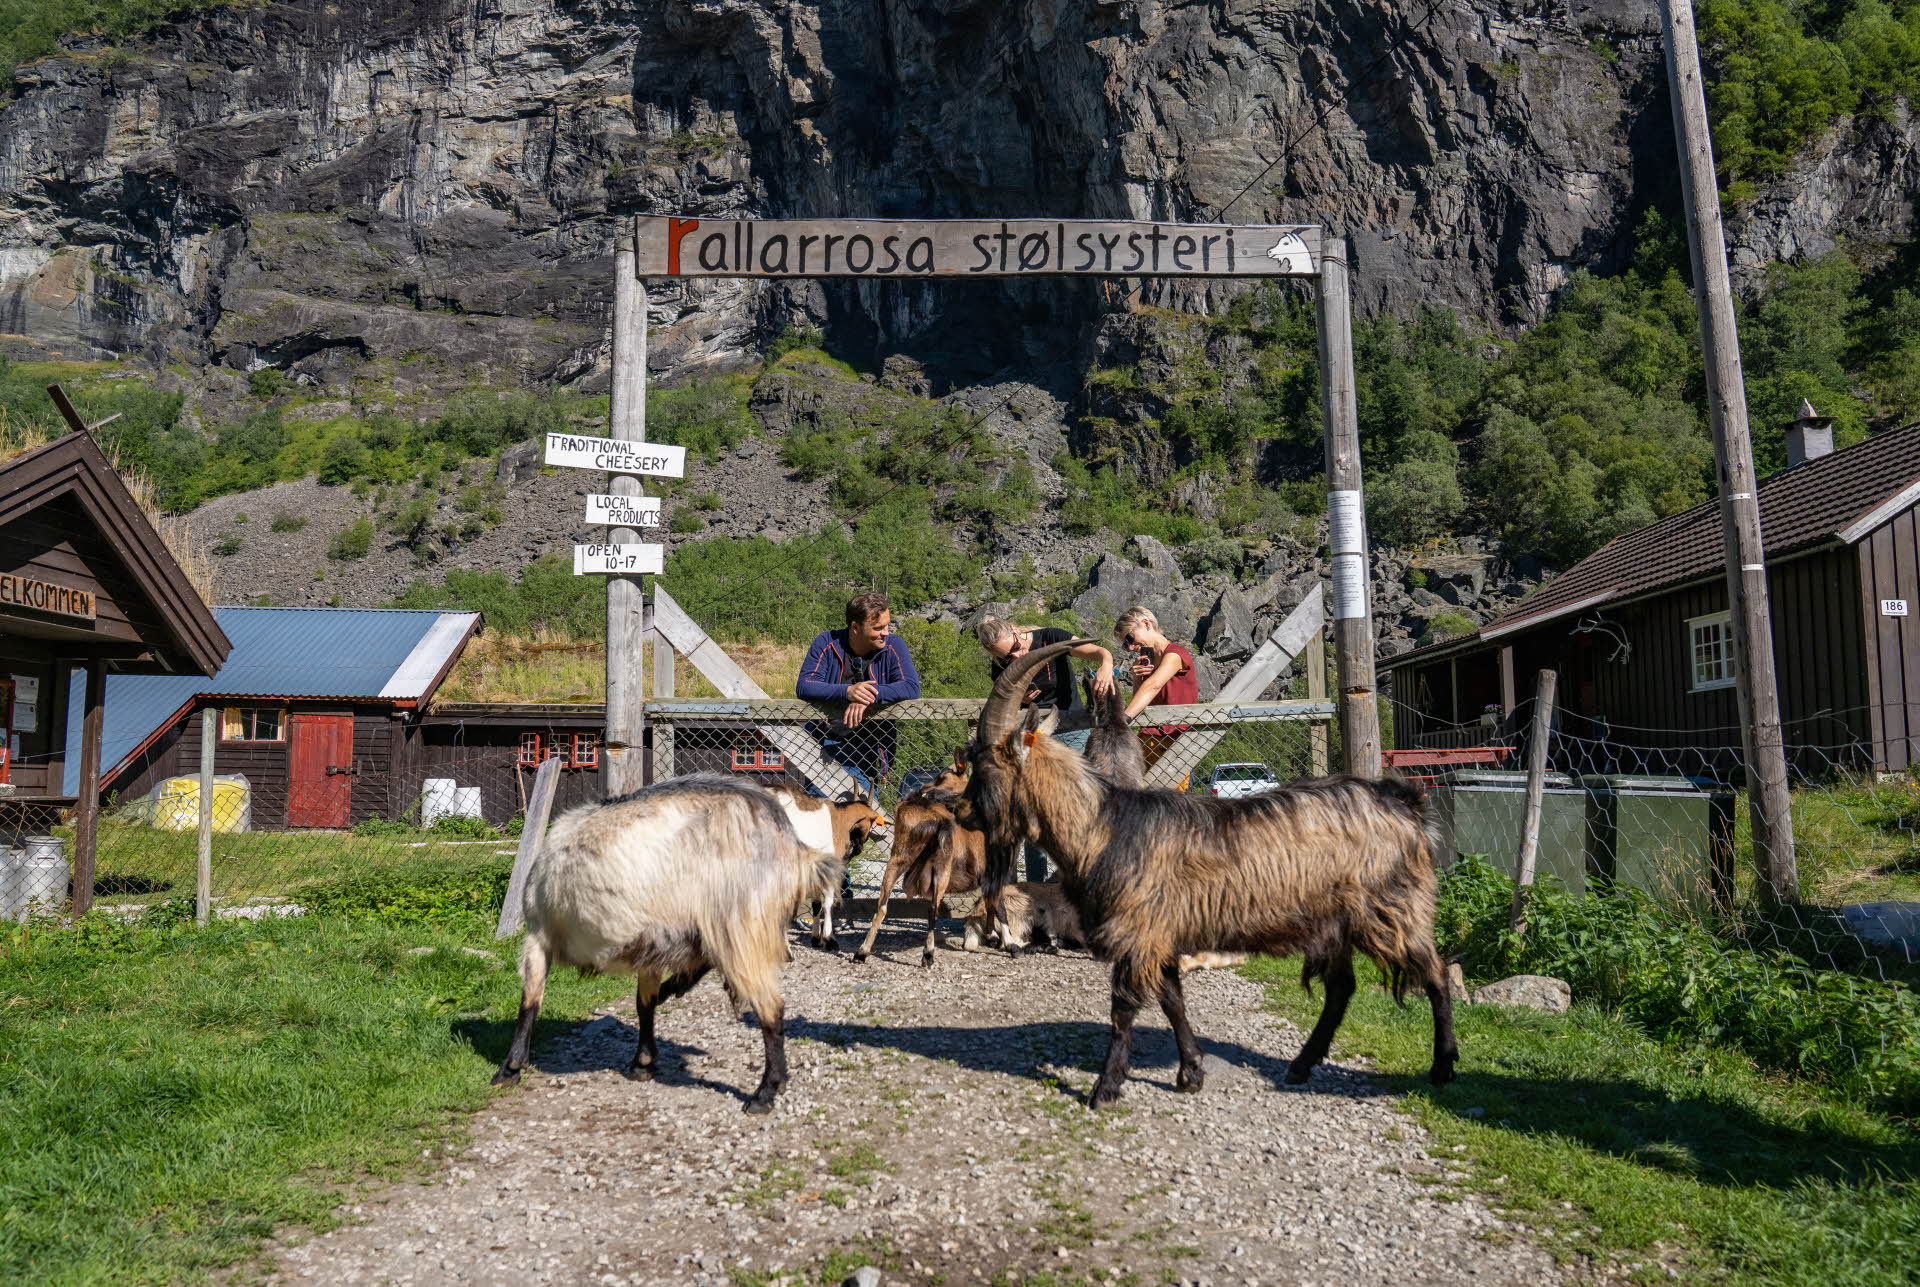 Goats in front of a gate at a mountain farm. Three people leaning on the gate.